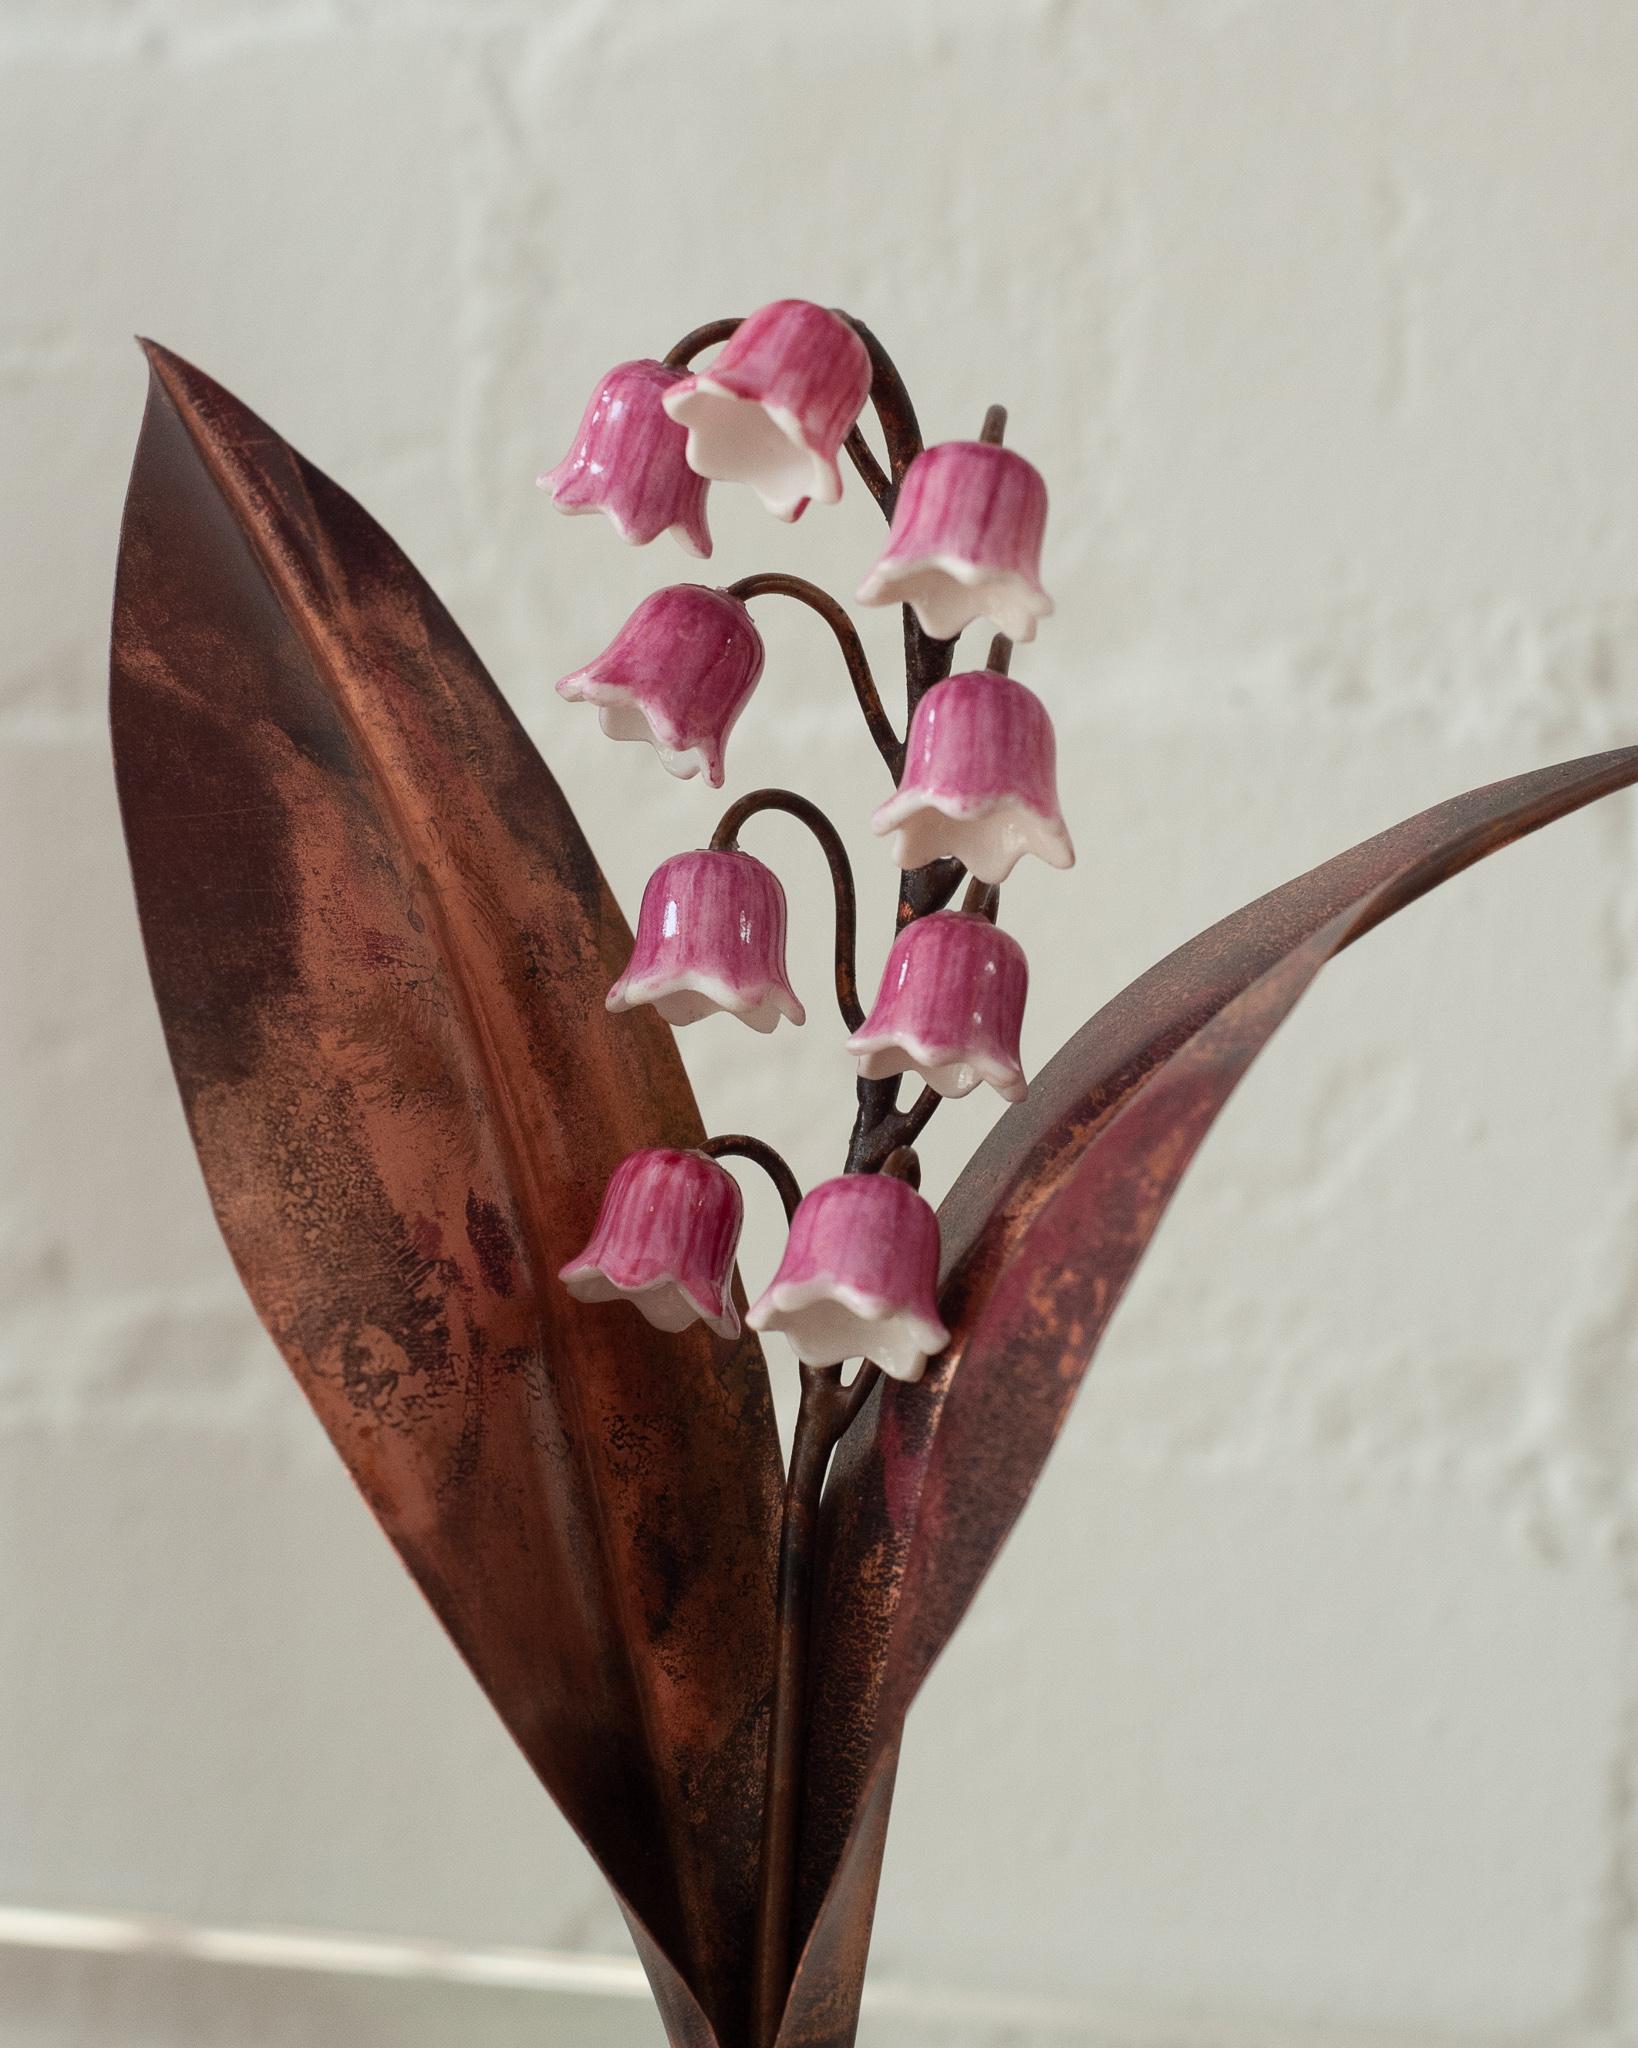 Contemporary Samuel Mazy x Maison Nurita Pink Glazed Porcelain Lily of the Valley Sculpture For Sale